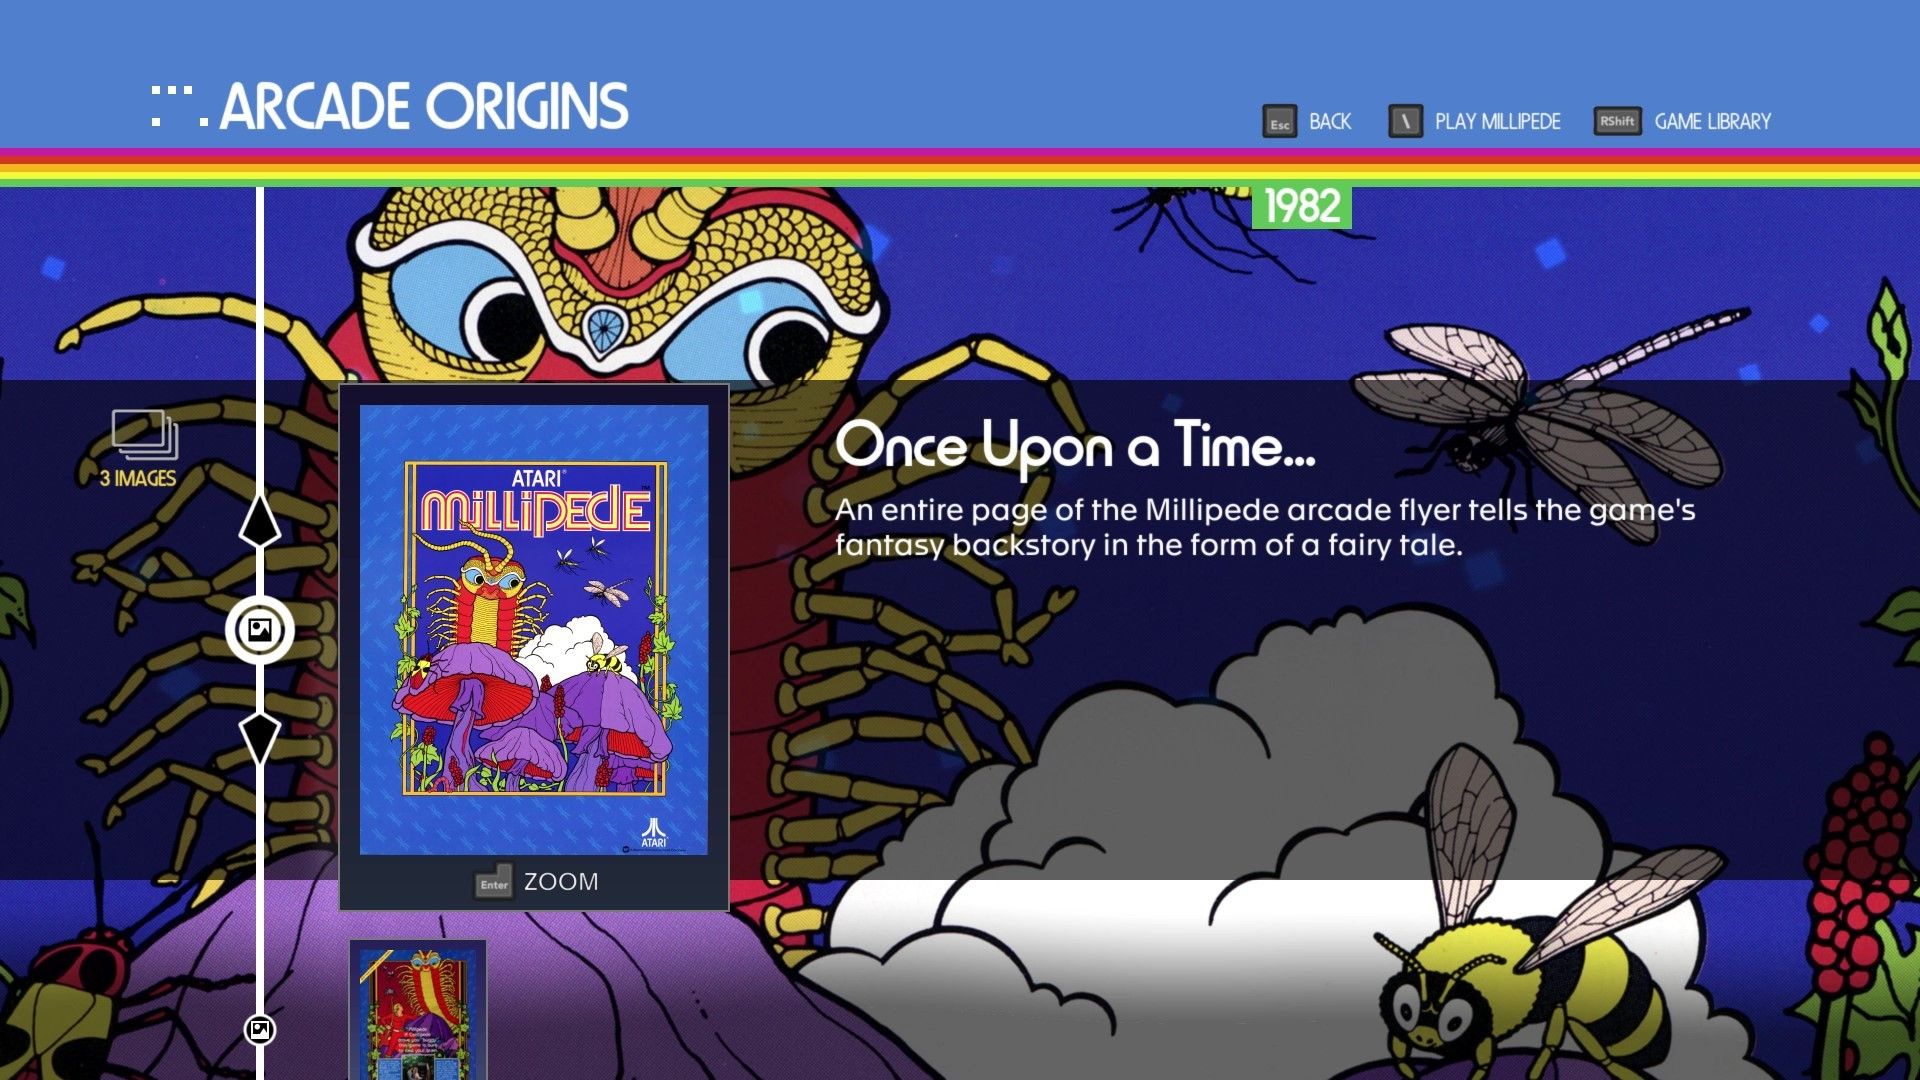 Screenshot of poster showing a blue millipede video game character